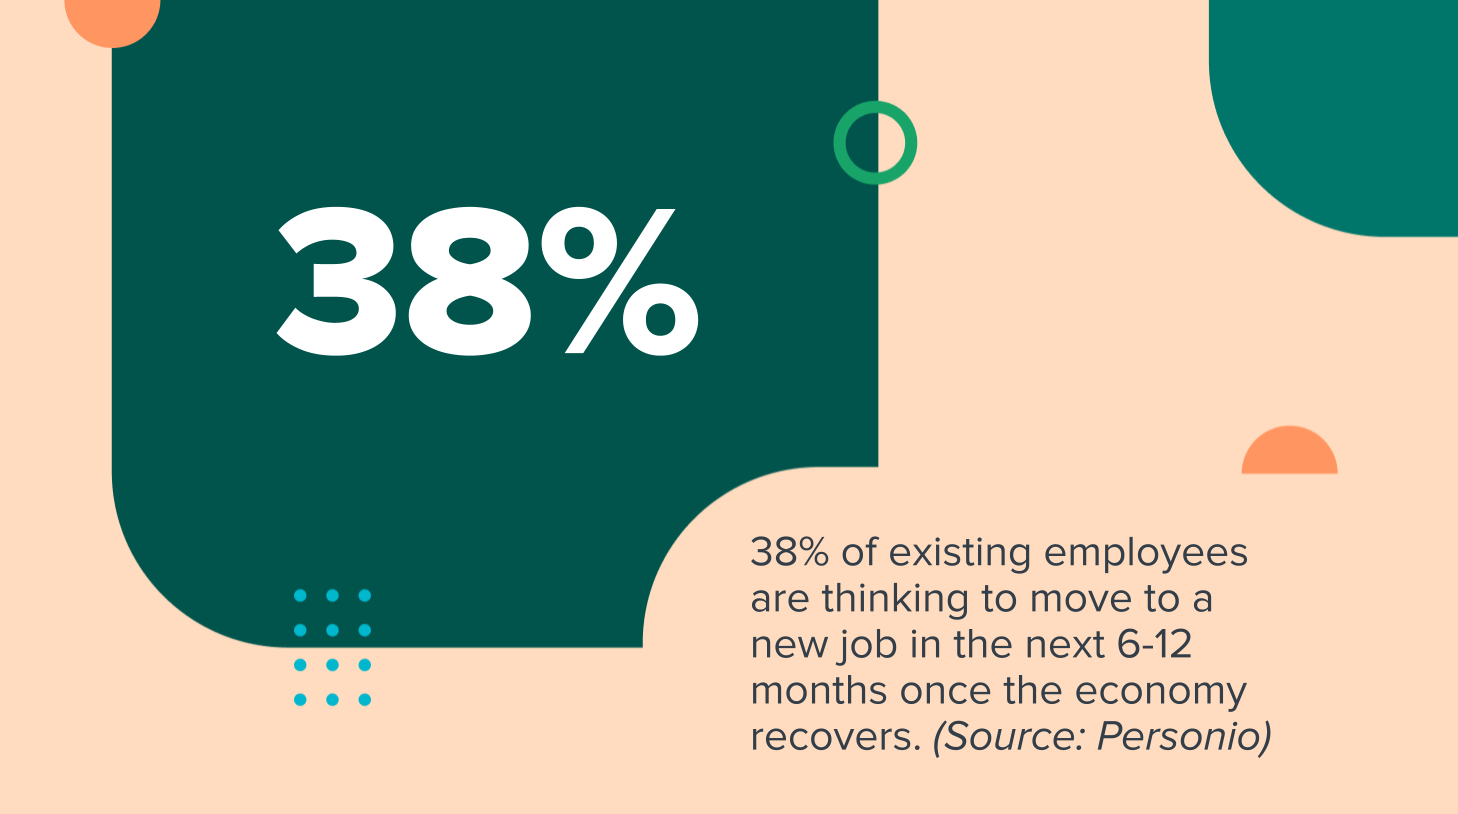 38% of existing employees are thinking to move to a new job in the next 6-12 months once the economy recovers. (Source: Personio)